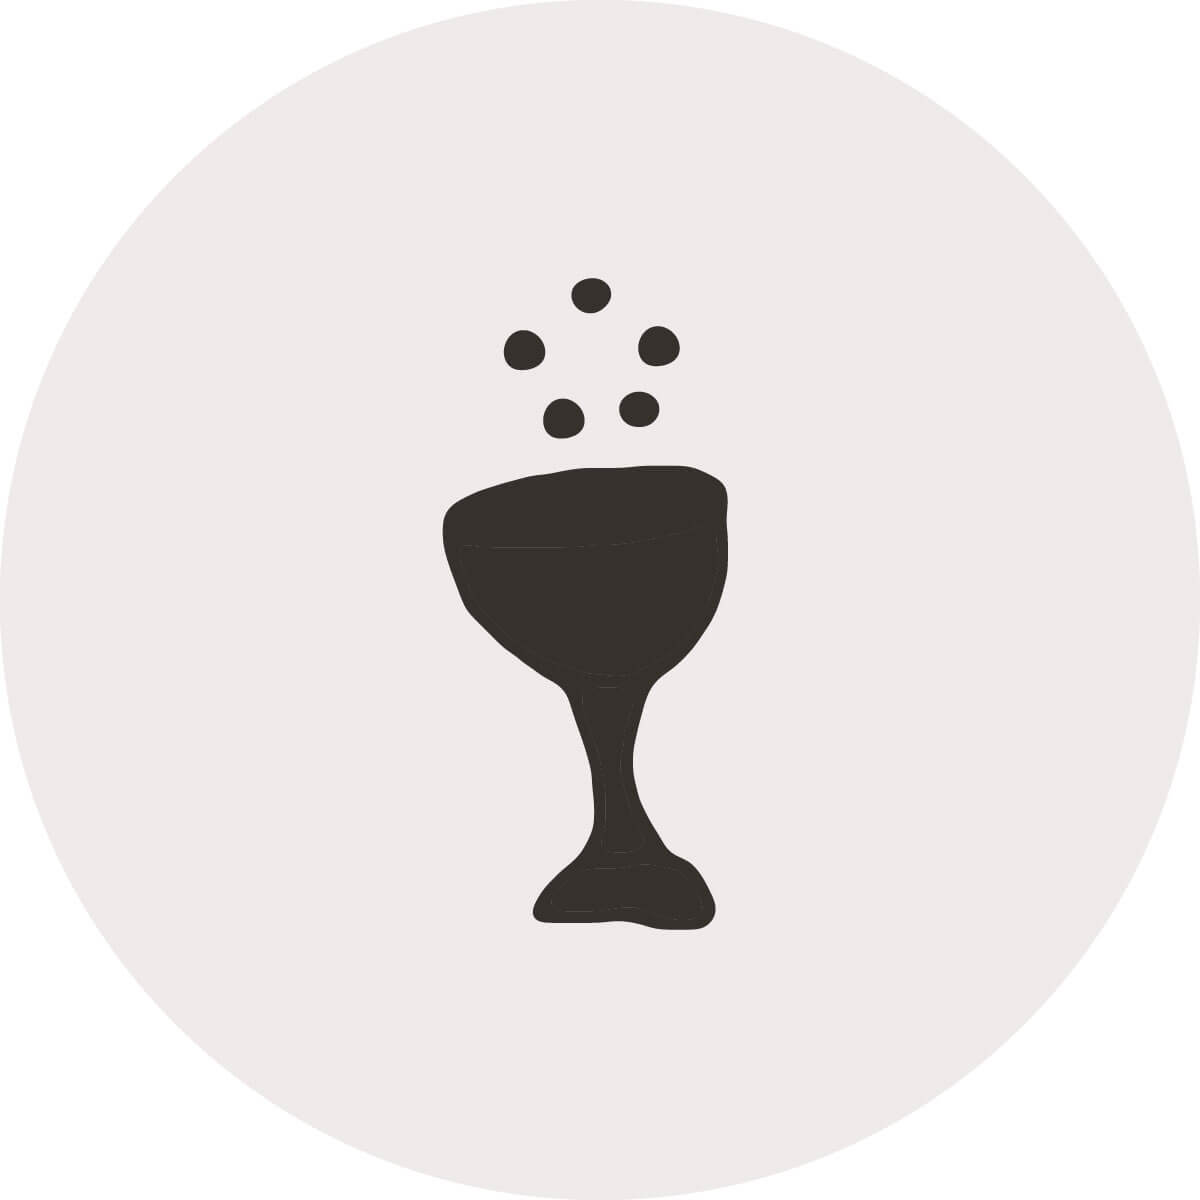 A black drawn image of a goblet with five dots above it resembling a star outline.